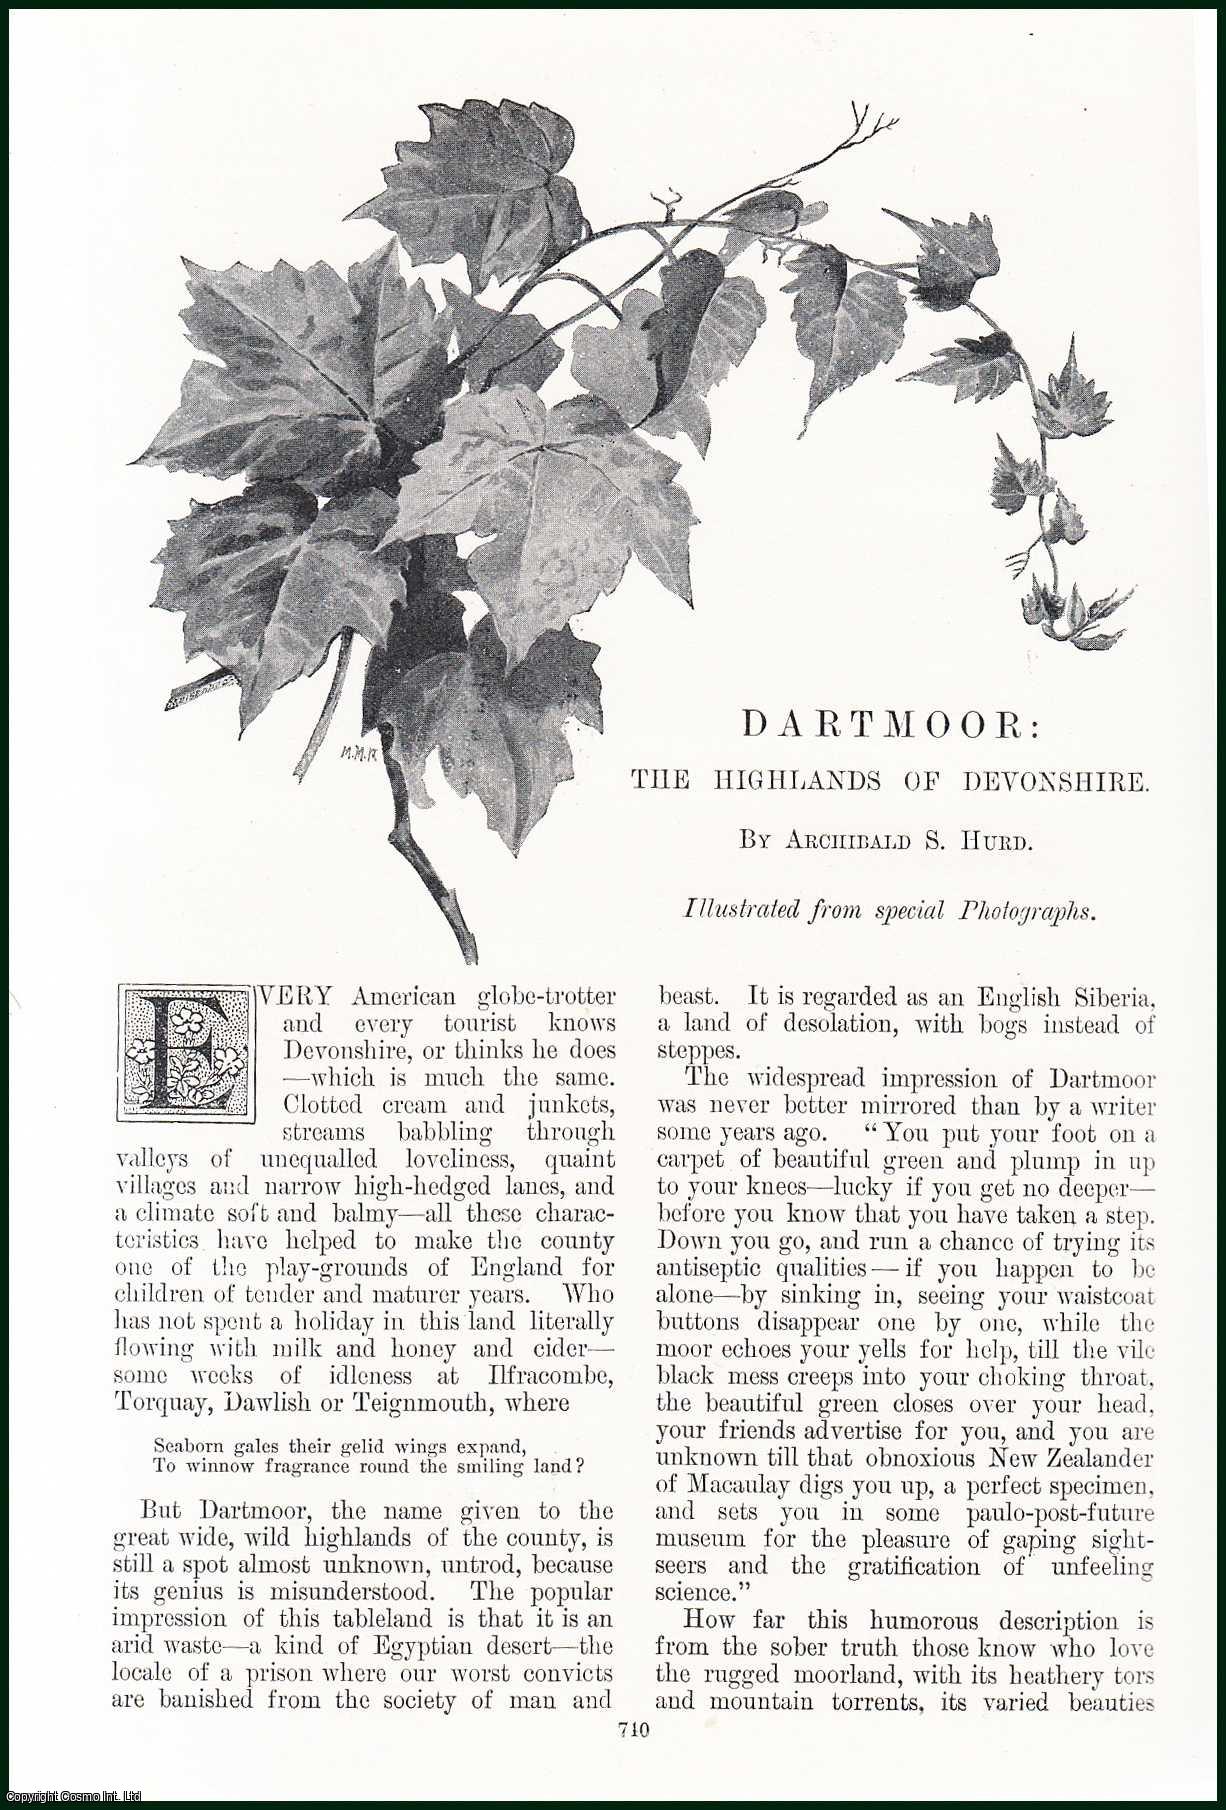 Archibald S. Hurd - Dartmoor: The Highlands of Devonshire. An original article from the Windsor Magazine 1897.